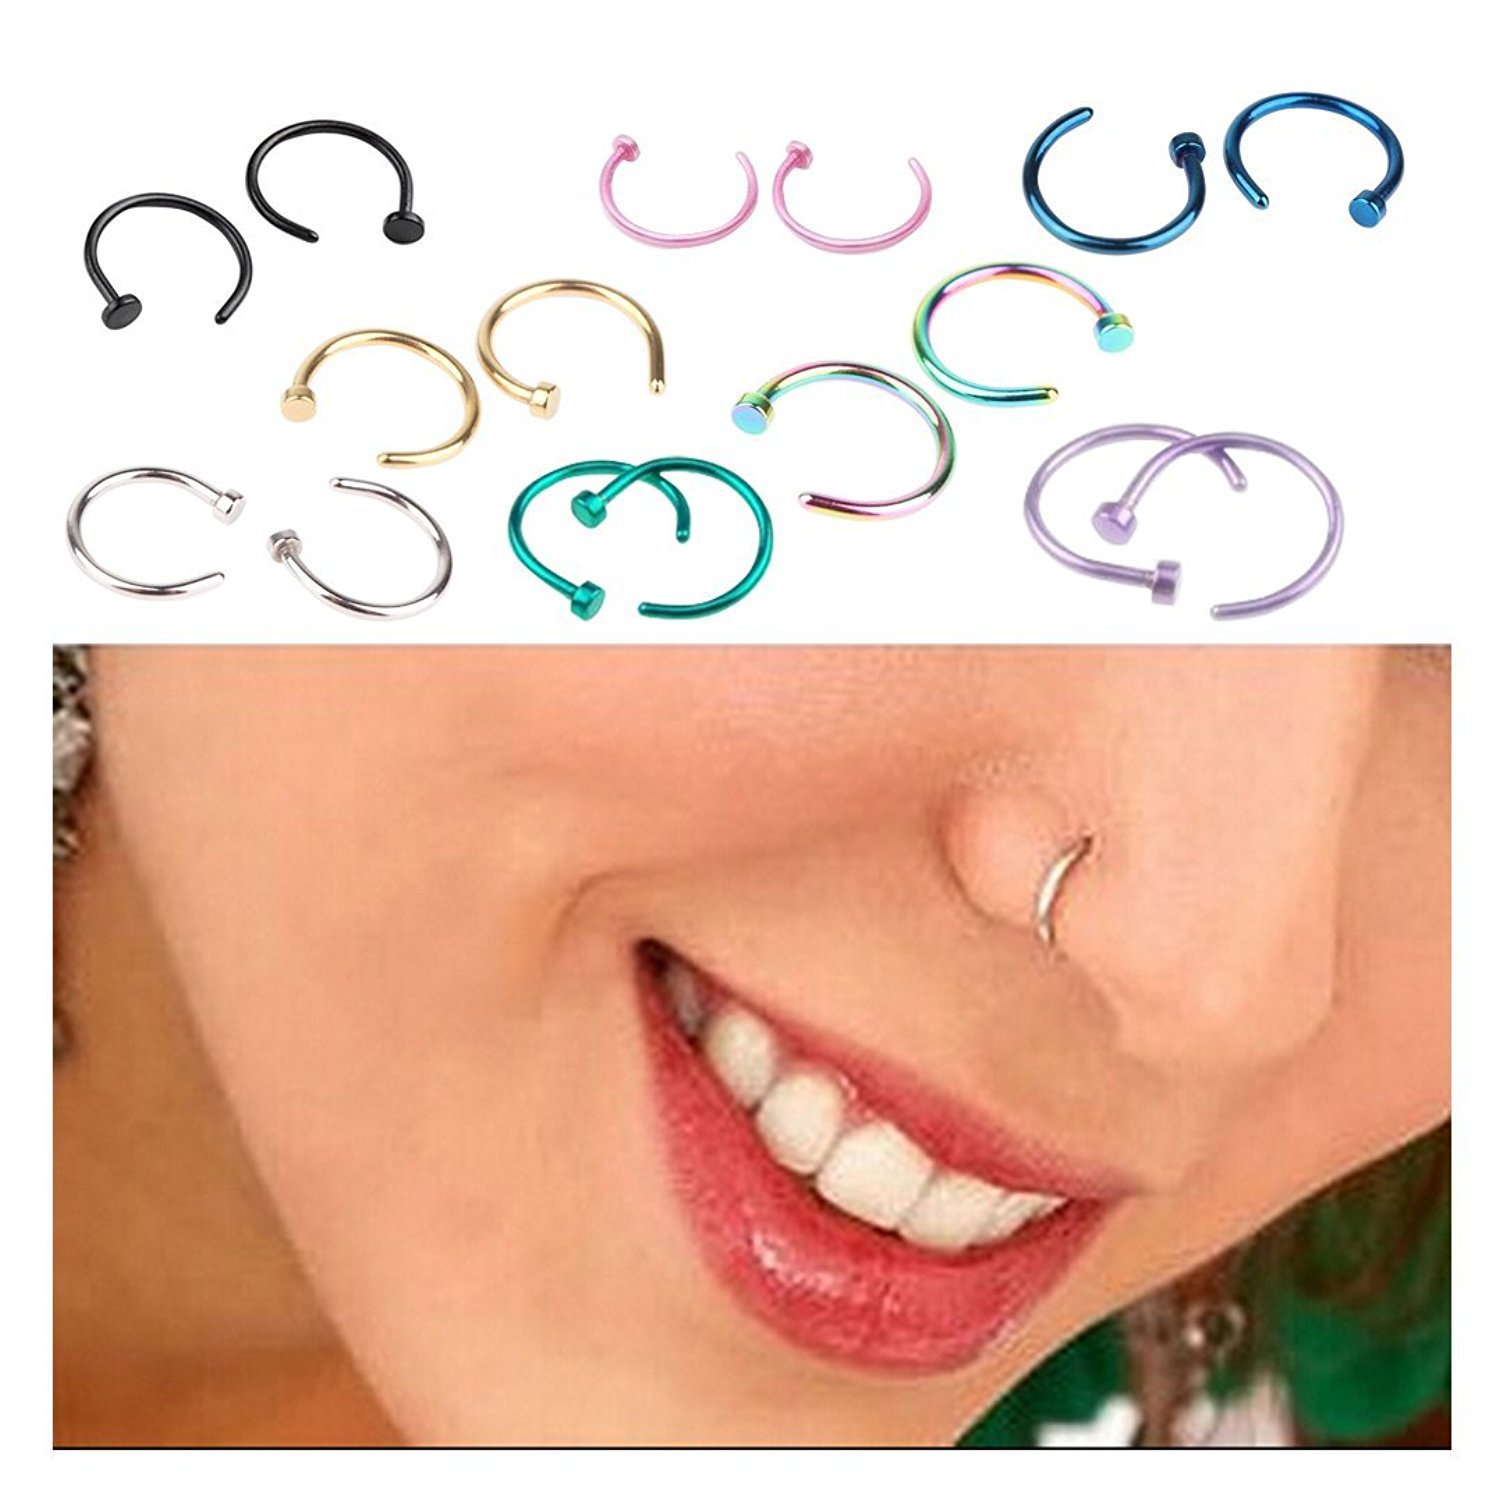 Stainless steel nose ring false nose rin...